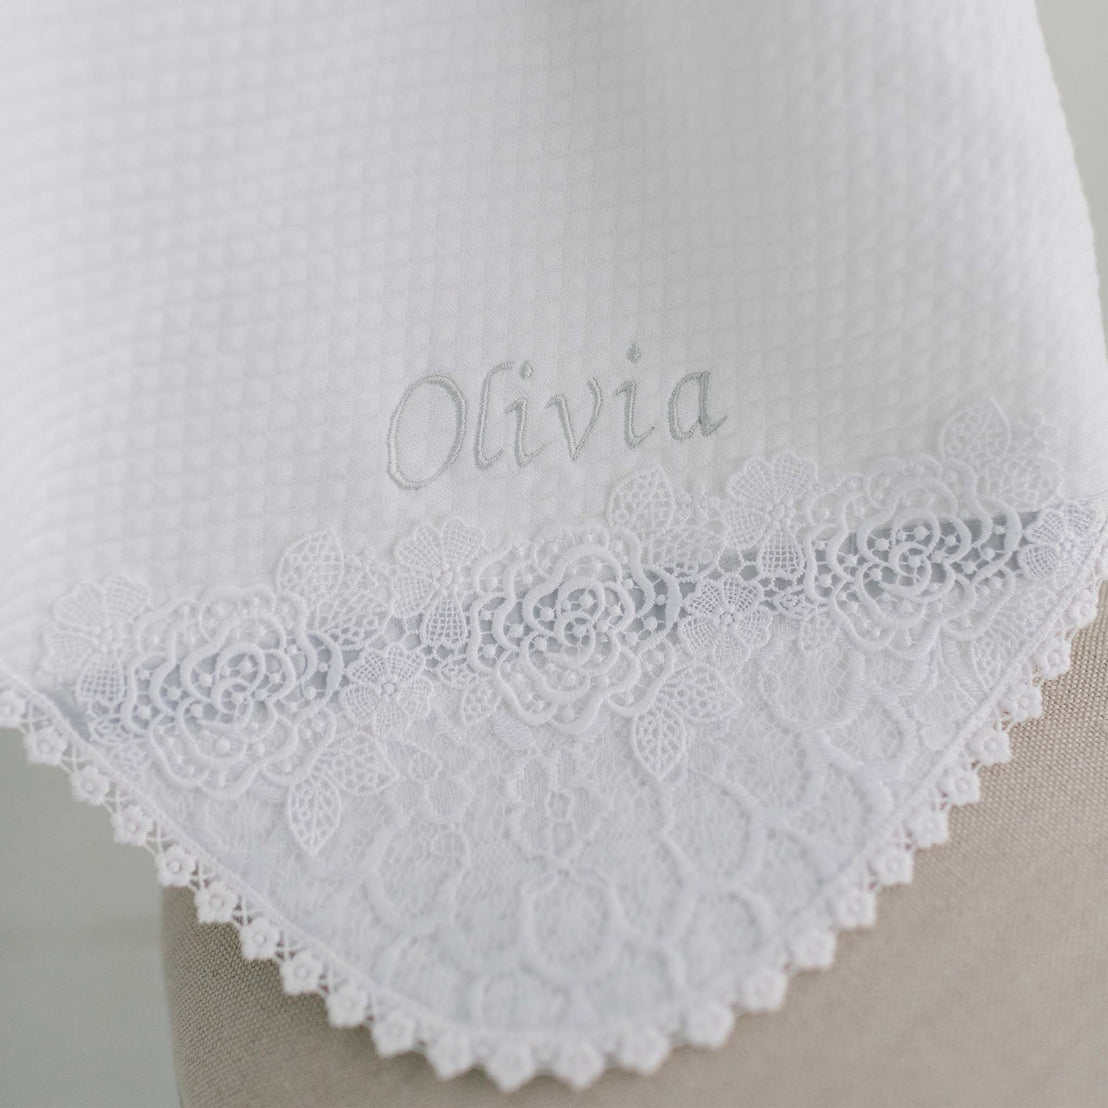 Close-up of an Olivia Personalized Blanket with delicate lace edging and the name "Olivia" embroidered in a subtle, elegant font, perfect as a christening or baptism baby gift.